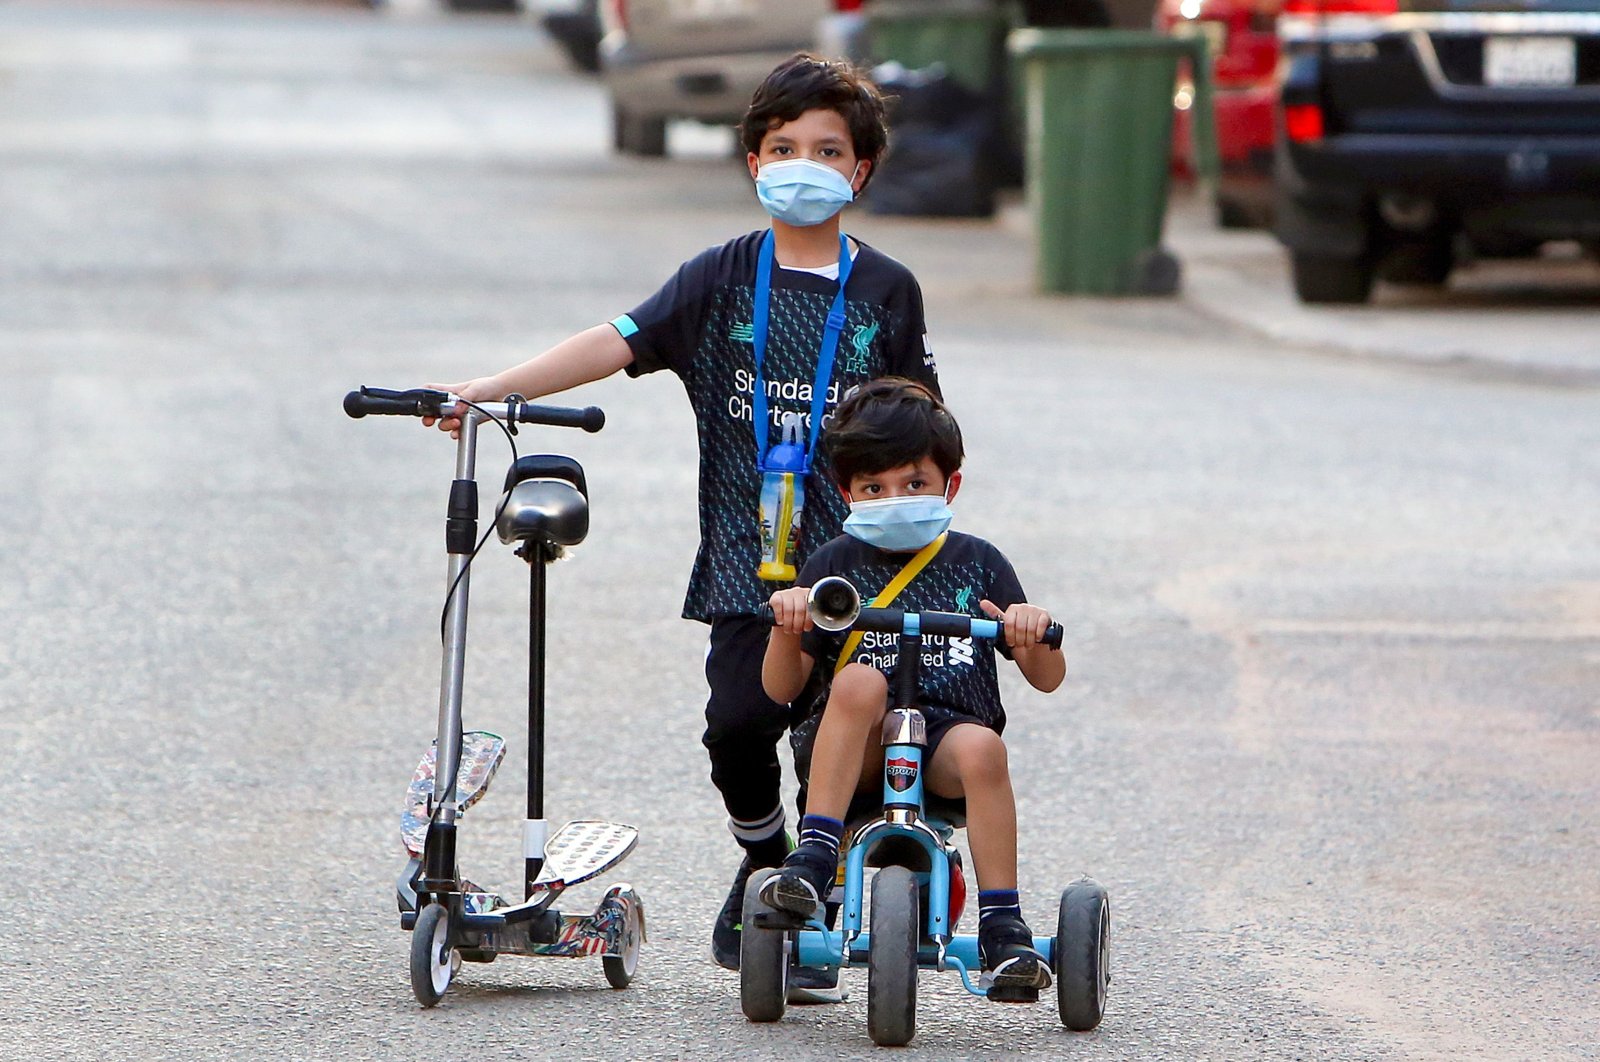 Kuwaiti children, wearing protective facemasks, cycle in a street in the Salwa district of Kuwait City, May 29, 2020. (AFP Photo)